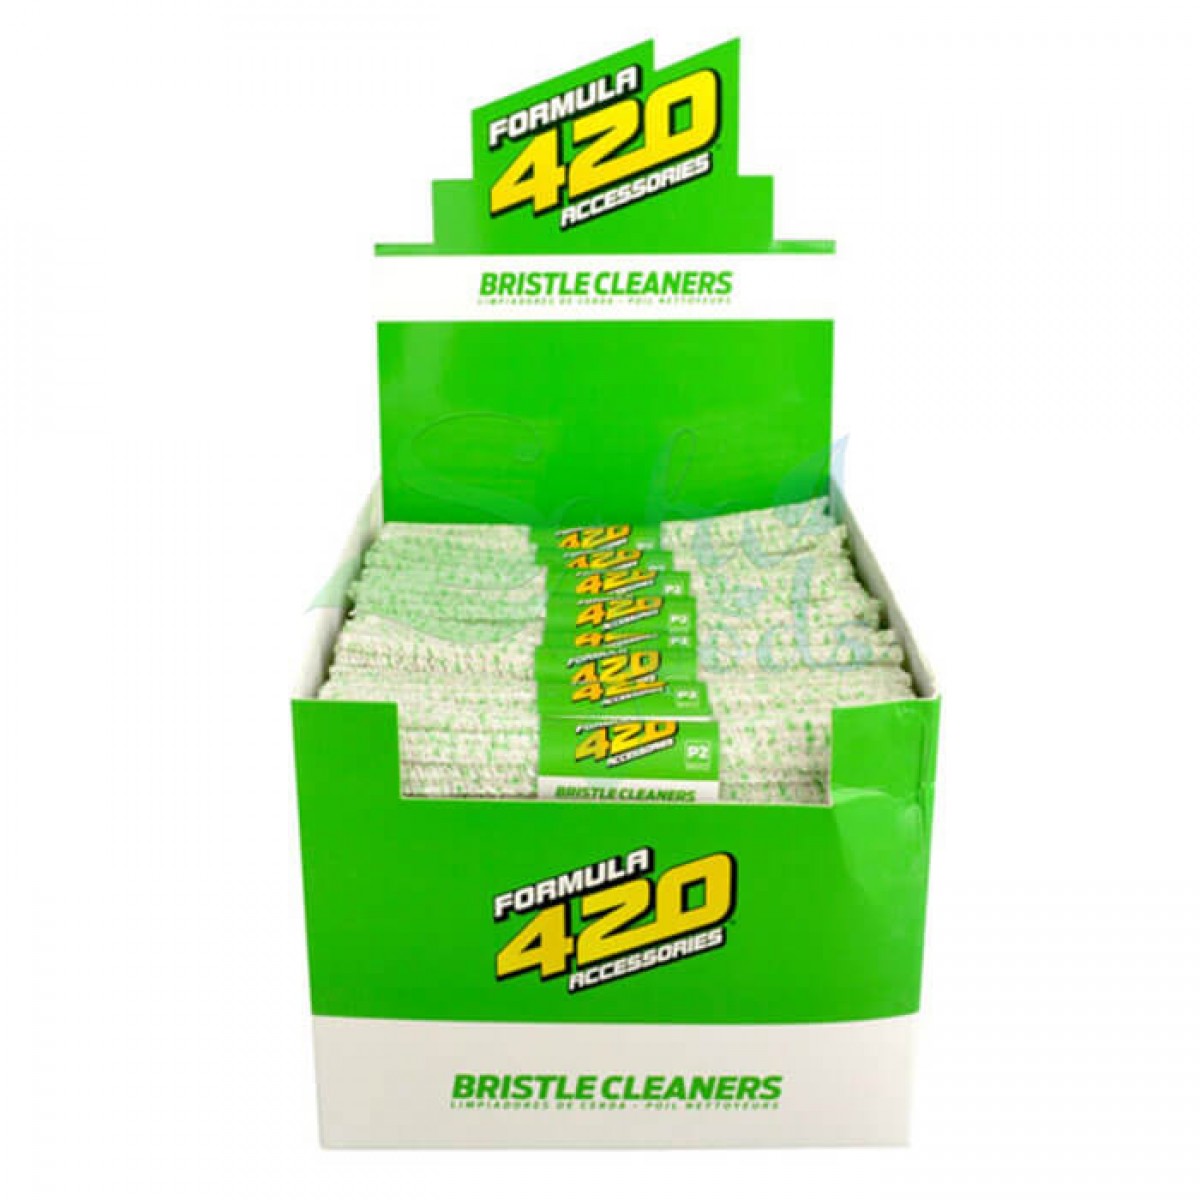 Formula 420 Pipe Cleaners - Bristle | 48pc Display